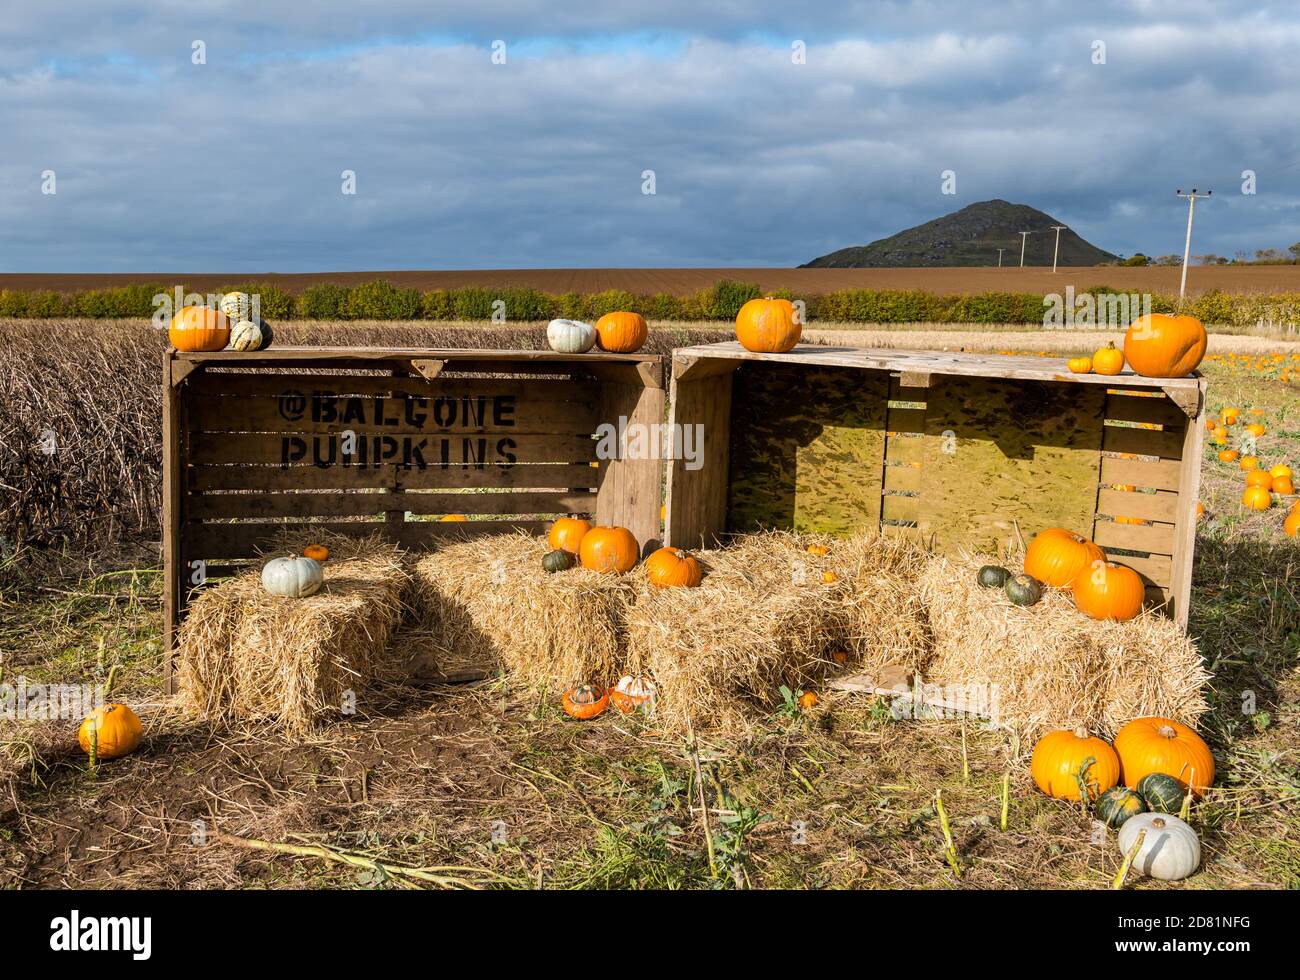 Crate with pumpkin and view of Berwick Law, Balgone pumpkin patch, East Lothian, Scotland, UK Stock Photo